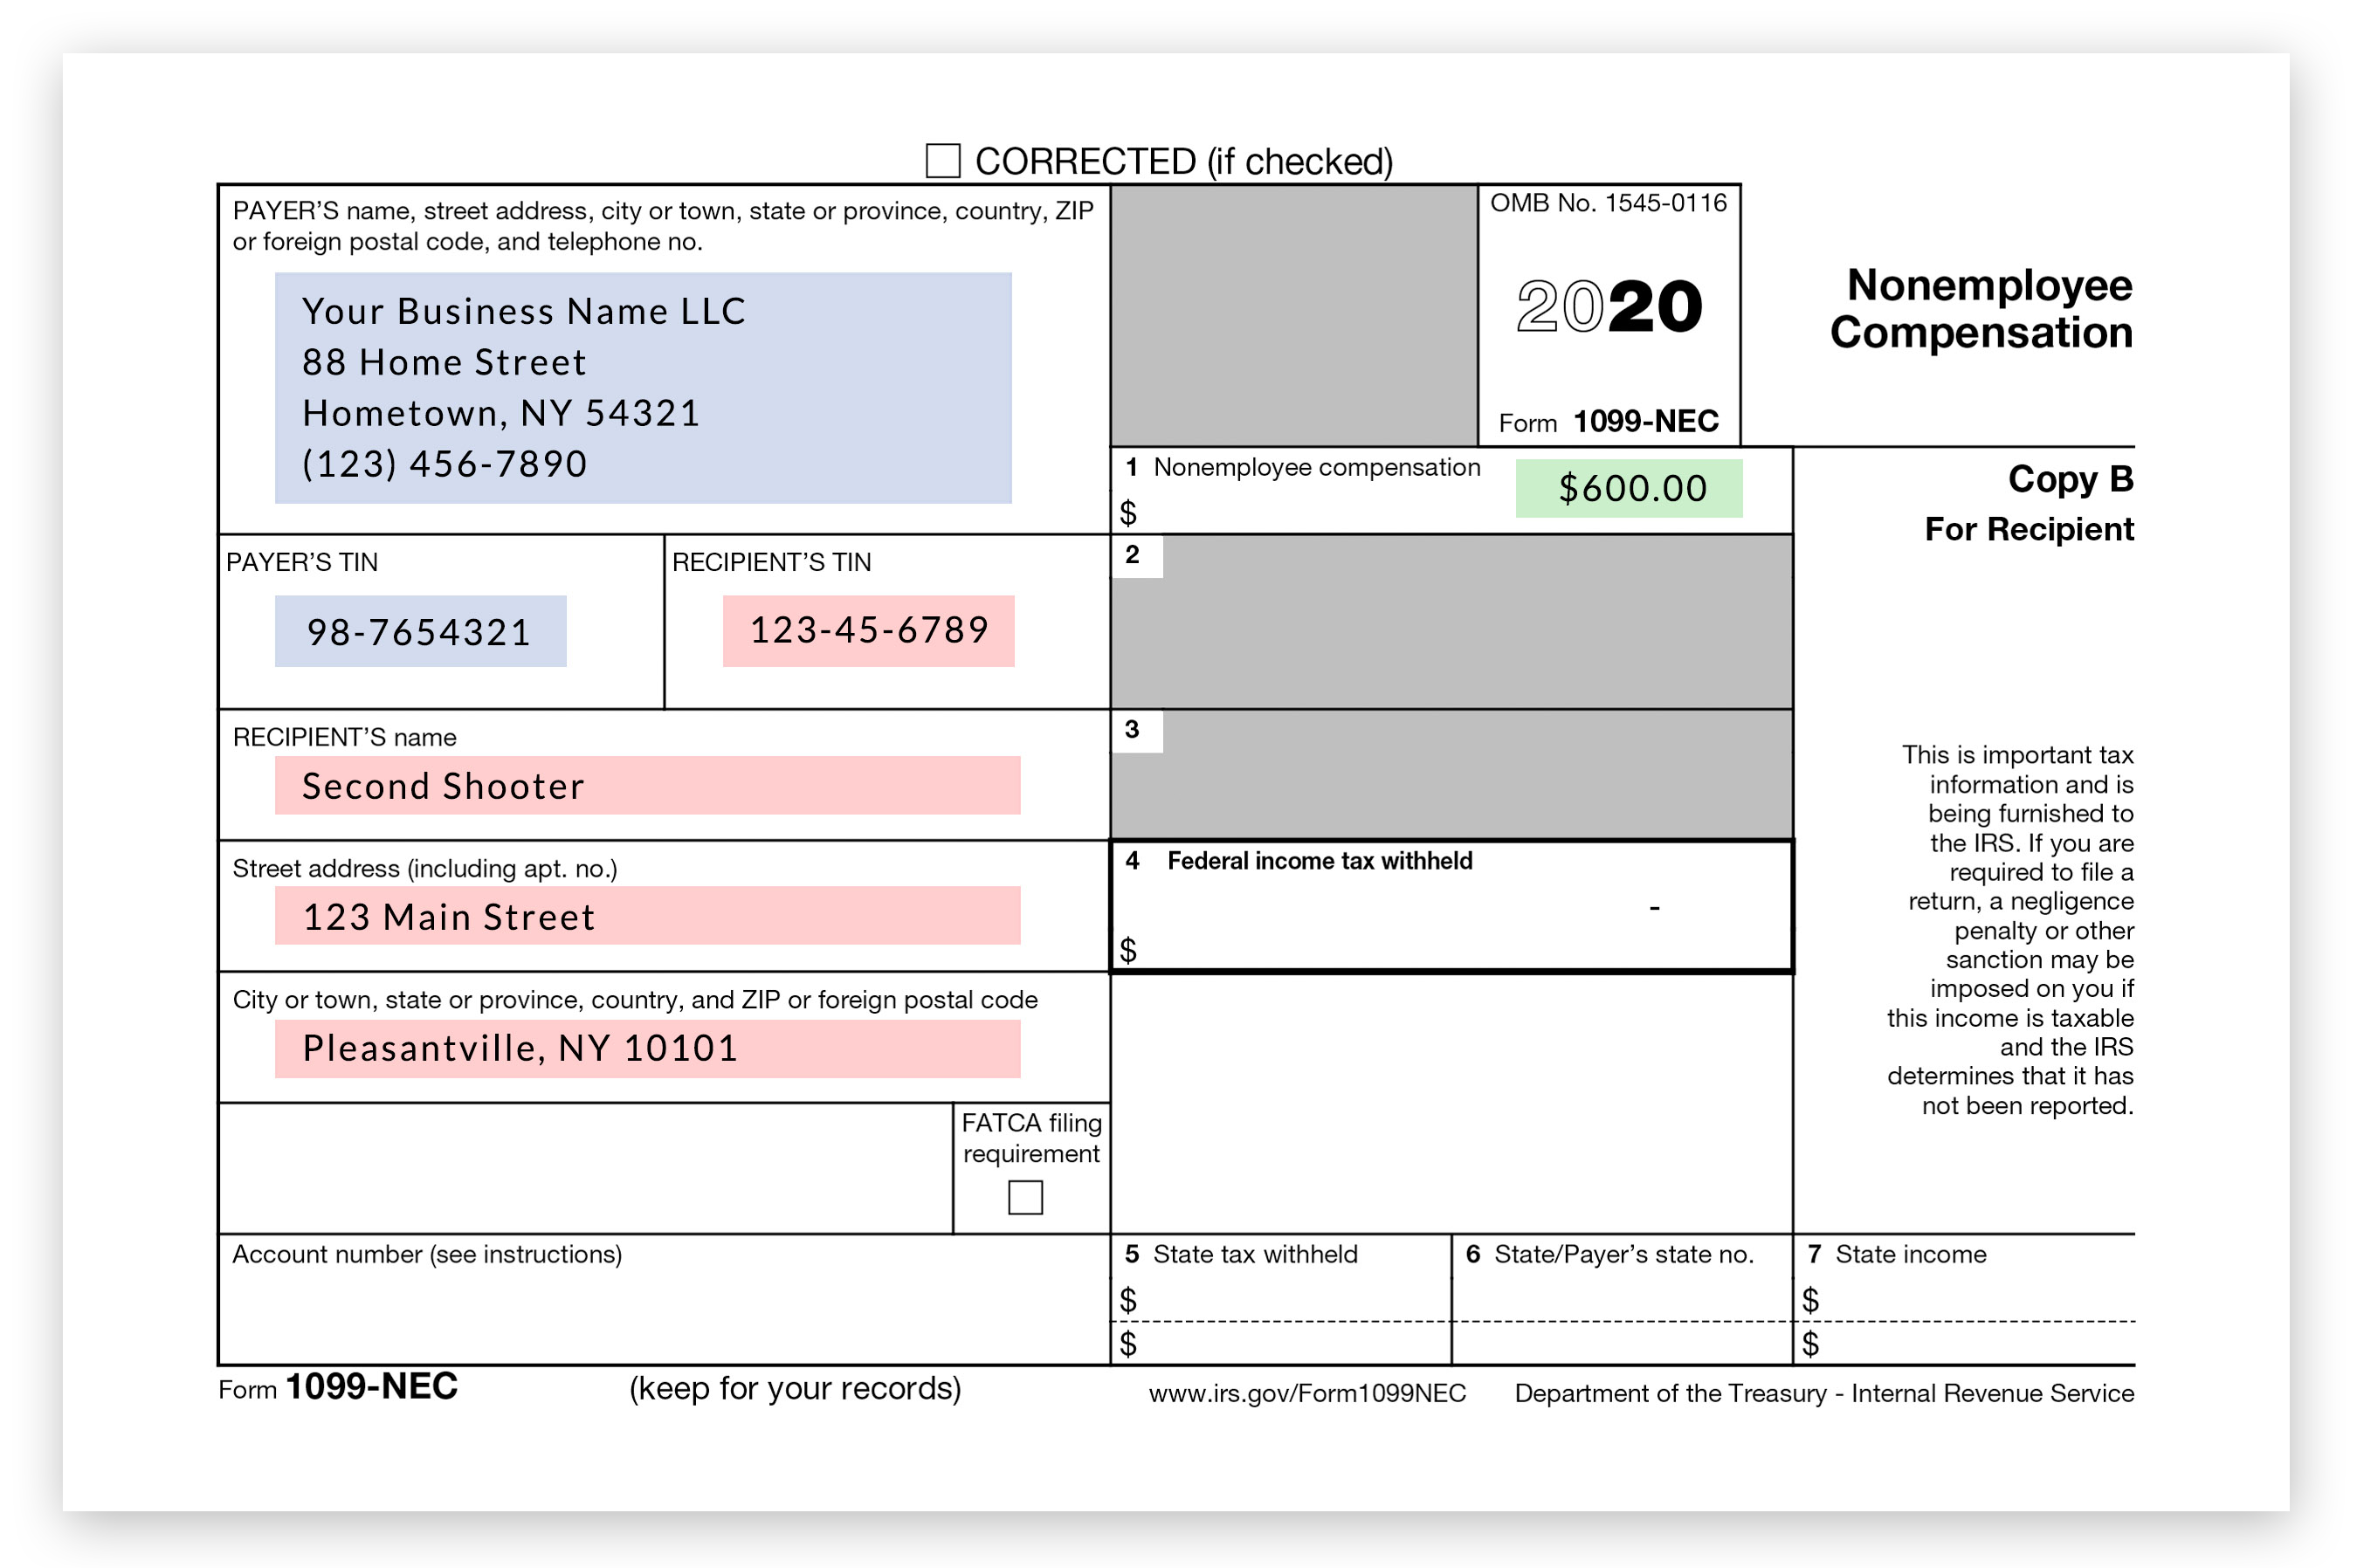 example new 1099-NEC IRS form as of 2020